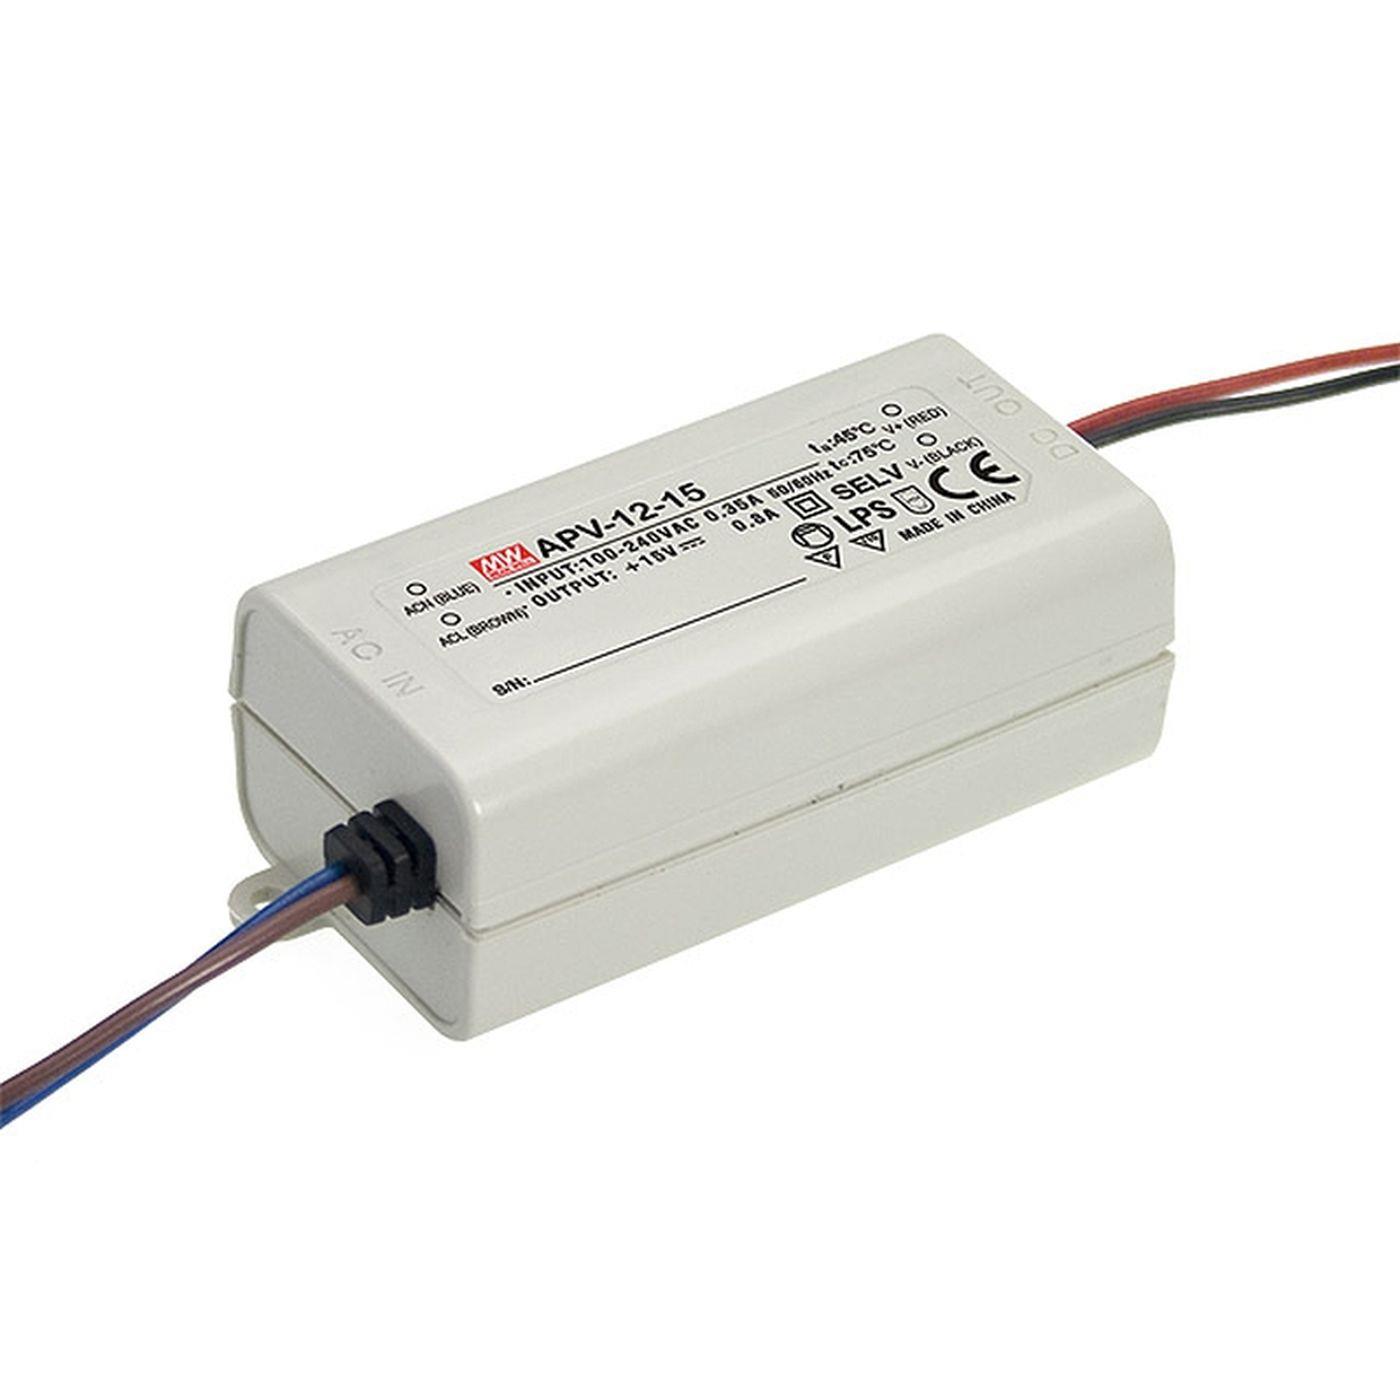 APC-12-350 12W 350mA 9...36VDC Constant current LED power supply Driver Transformer